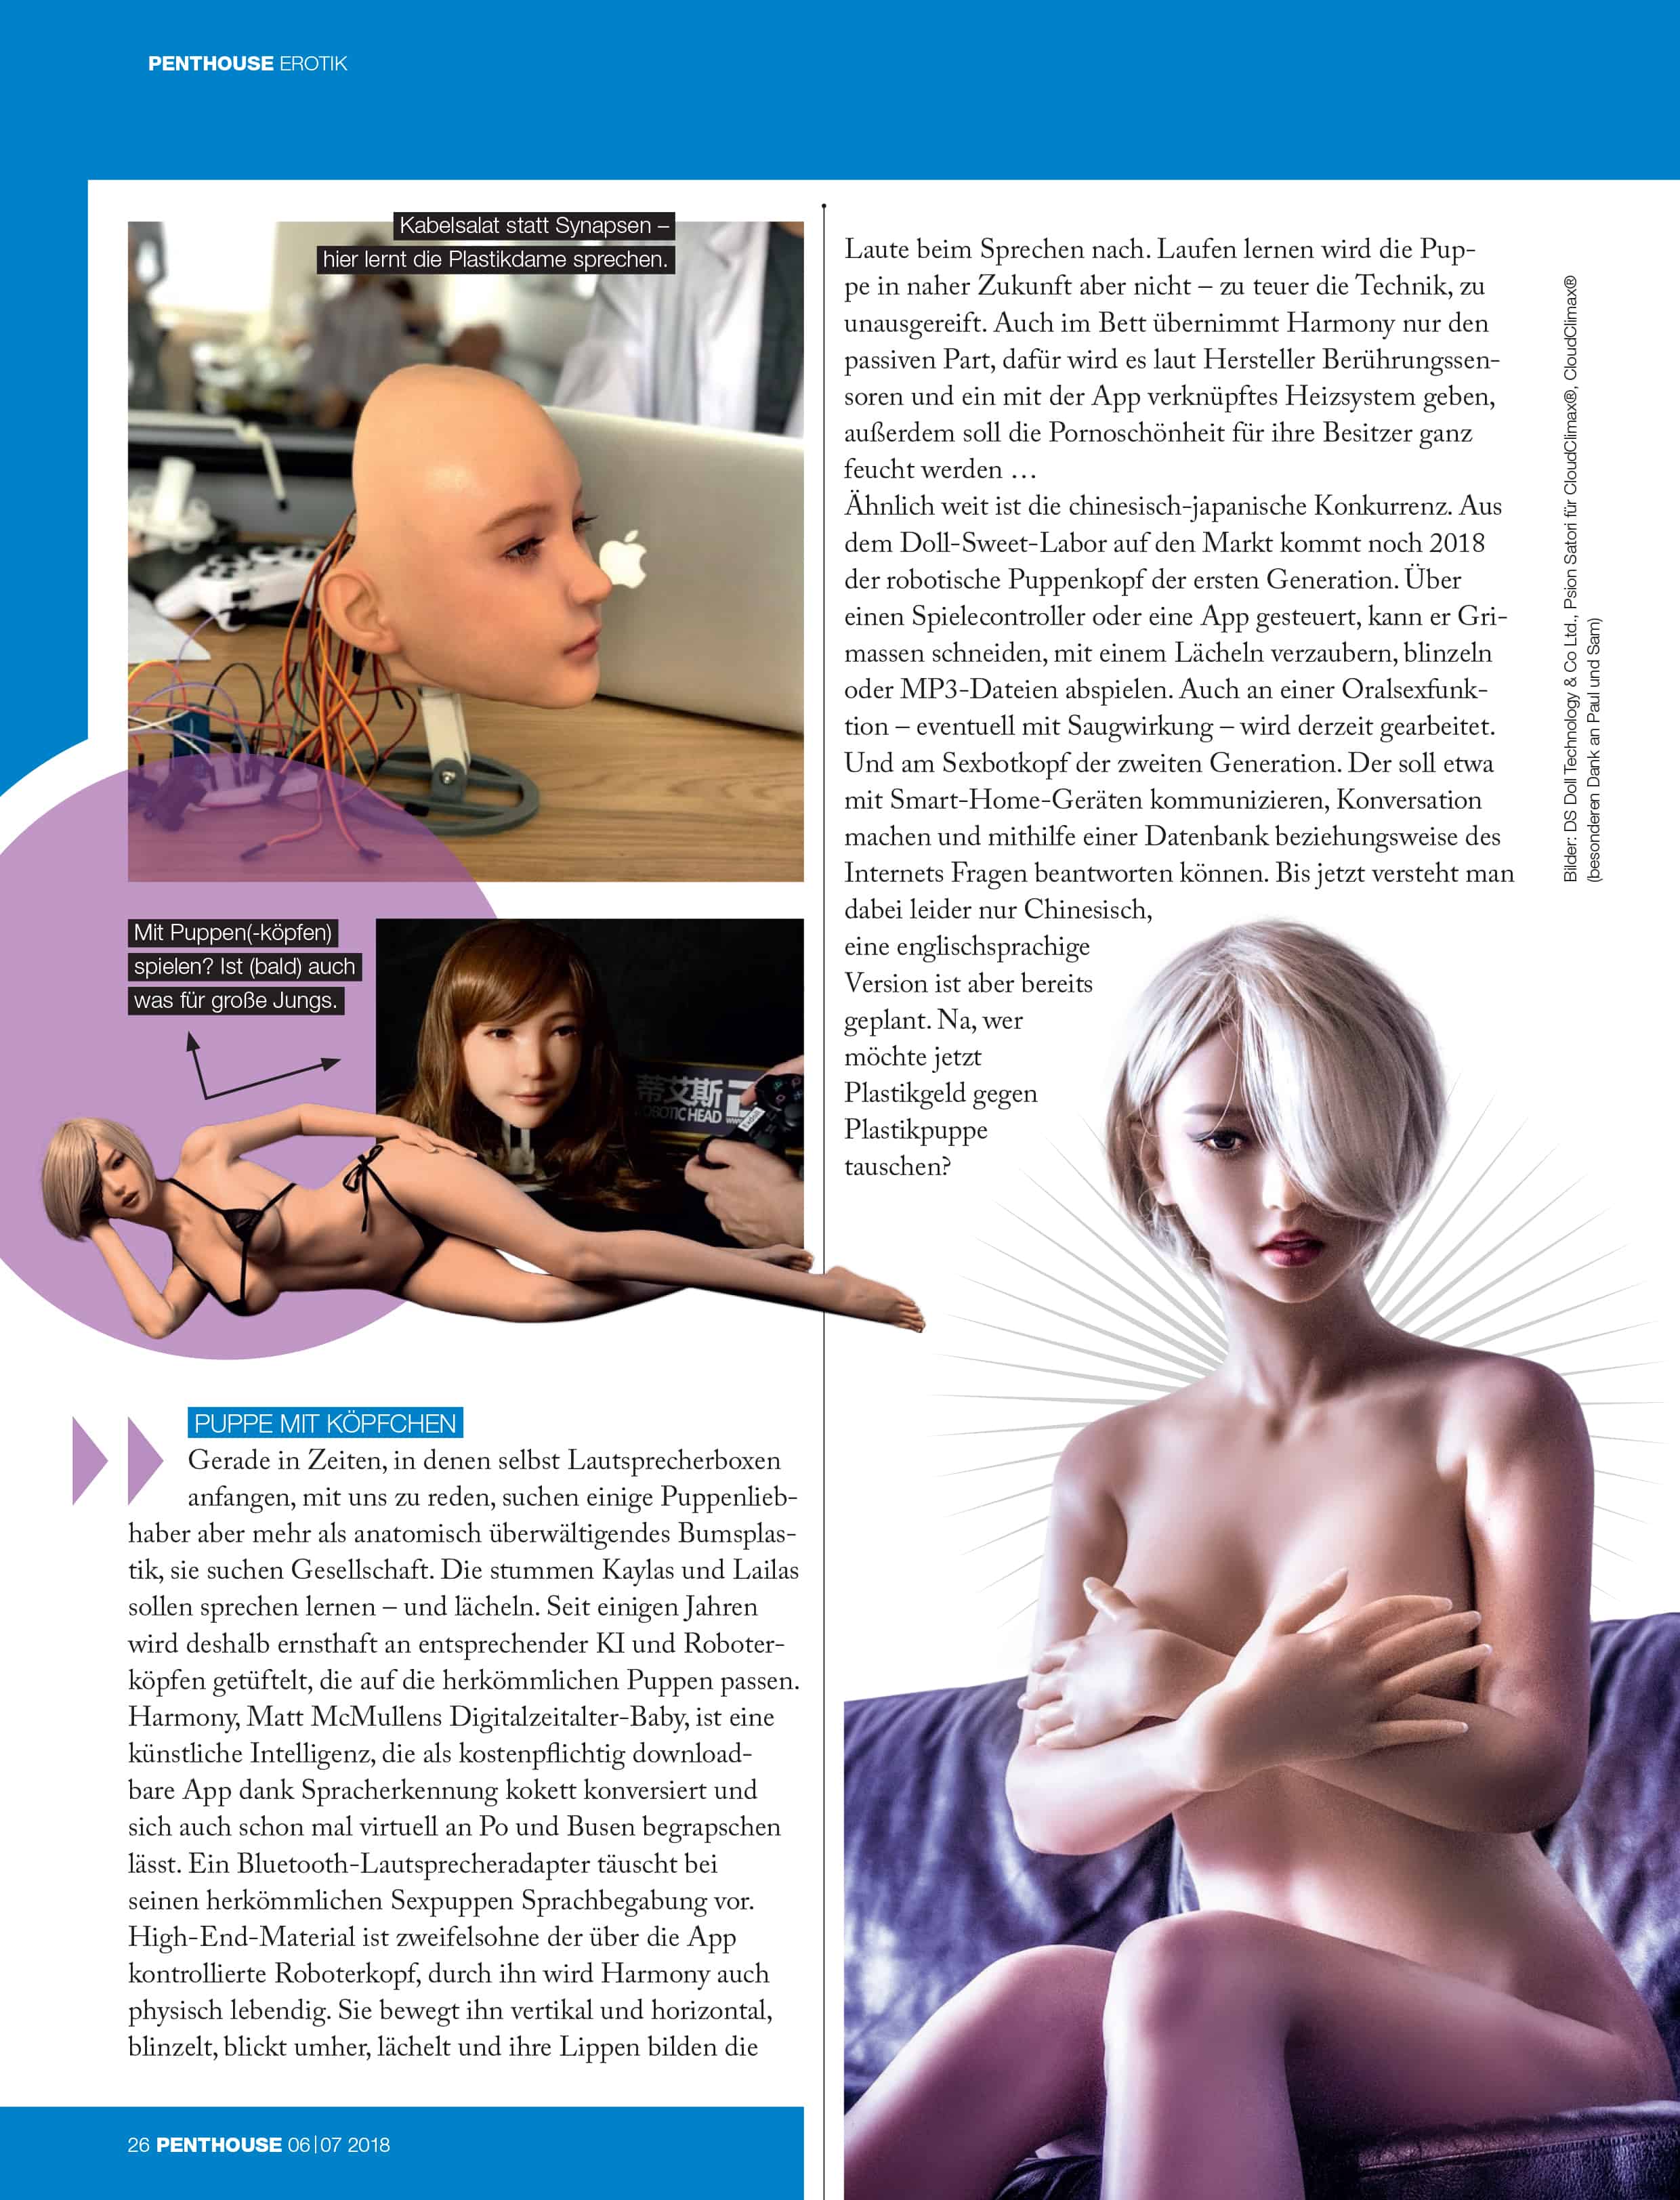 DS Doll Robotics featured in Penthouse Germany